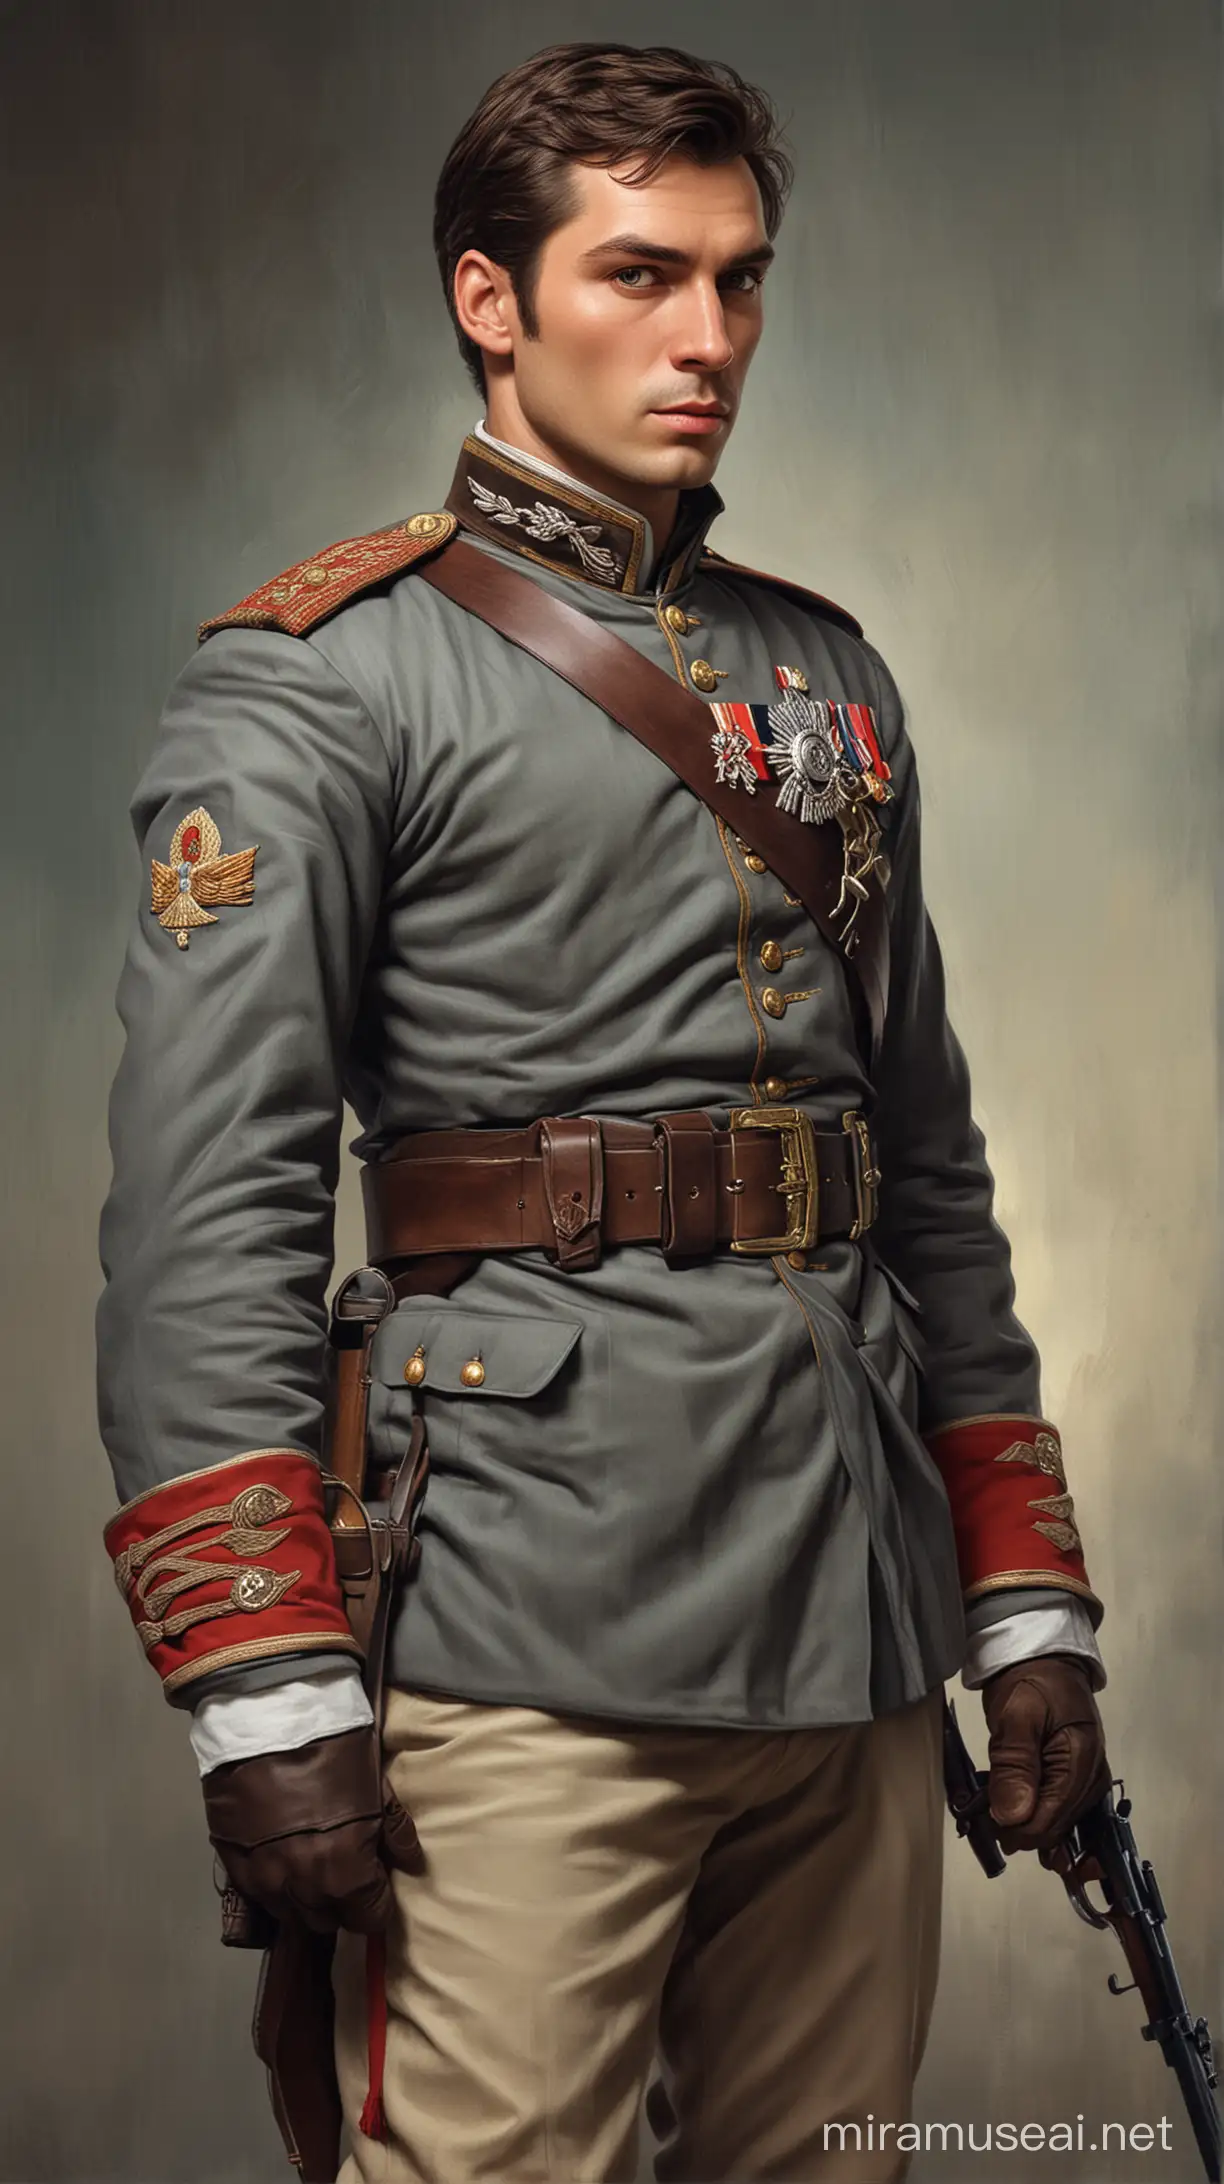 Military Officer Portrait from Leo Tolstoys War and Peace